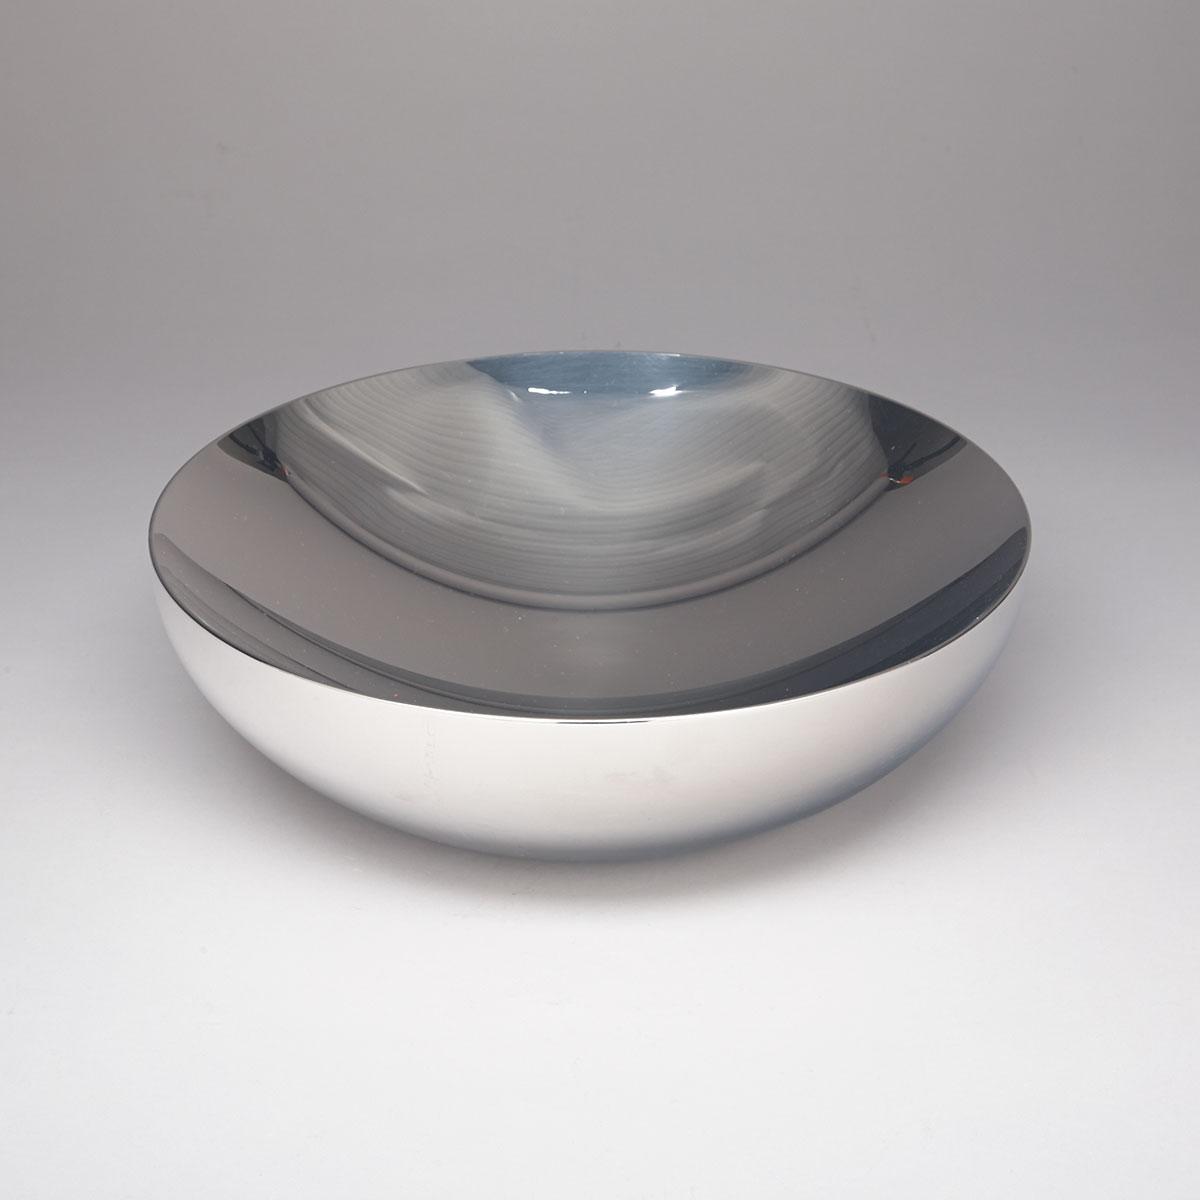 Alessi Stainless Steel ‘Double’ Bowl, Donato D’Urbino and Paolo Lomazzi, c.2002